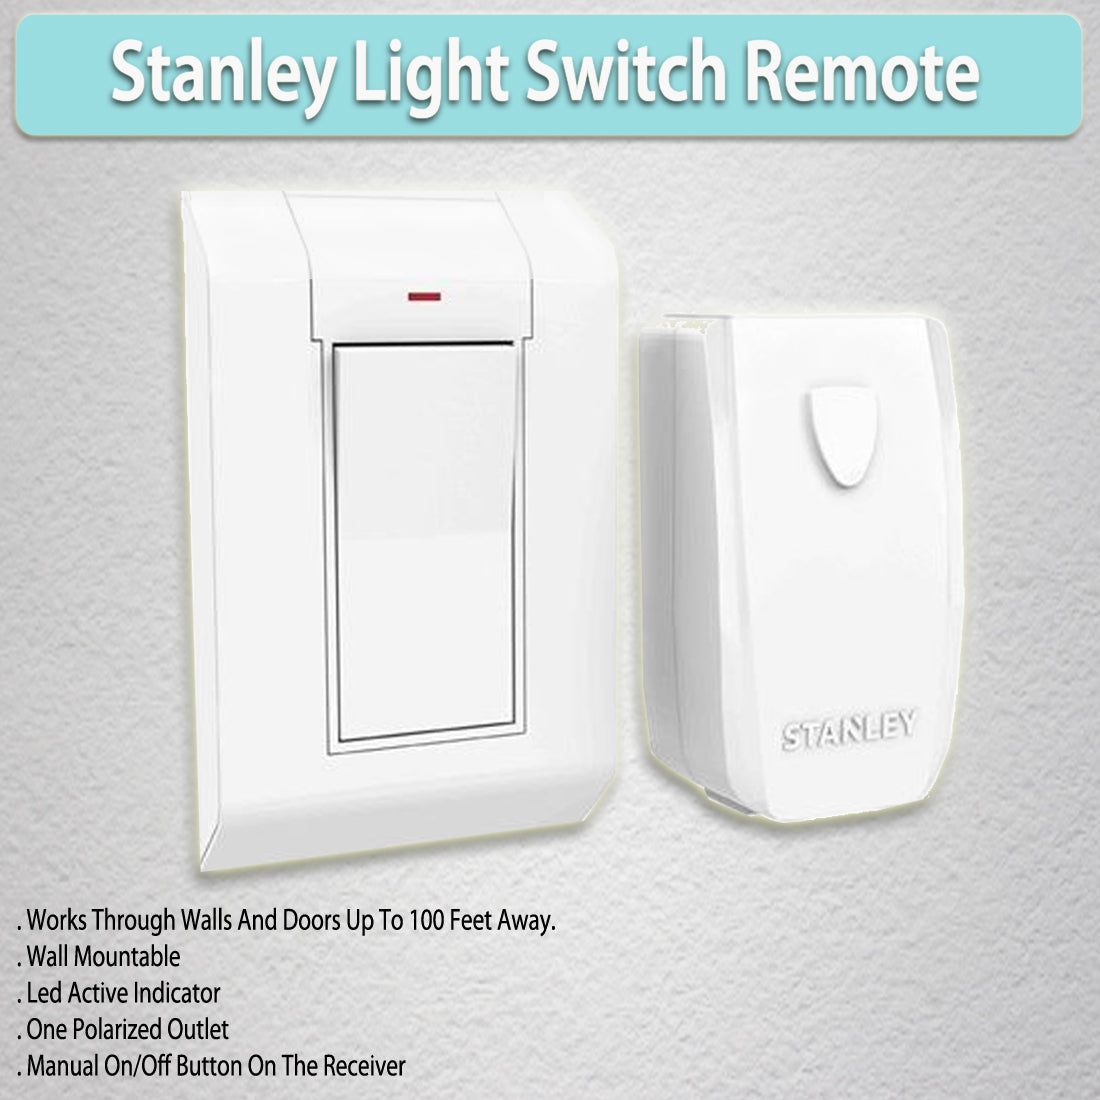 Stanley Light Switch Remote Wireless Wall Mounting Transmitter